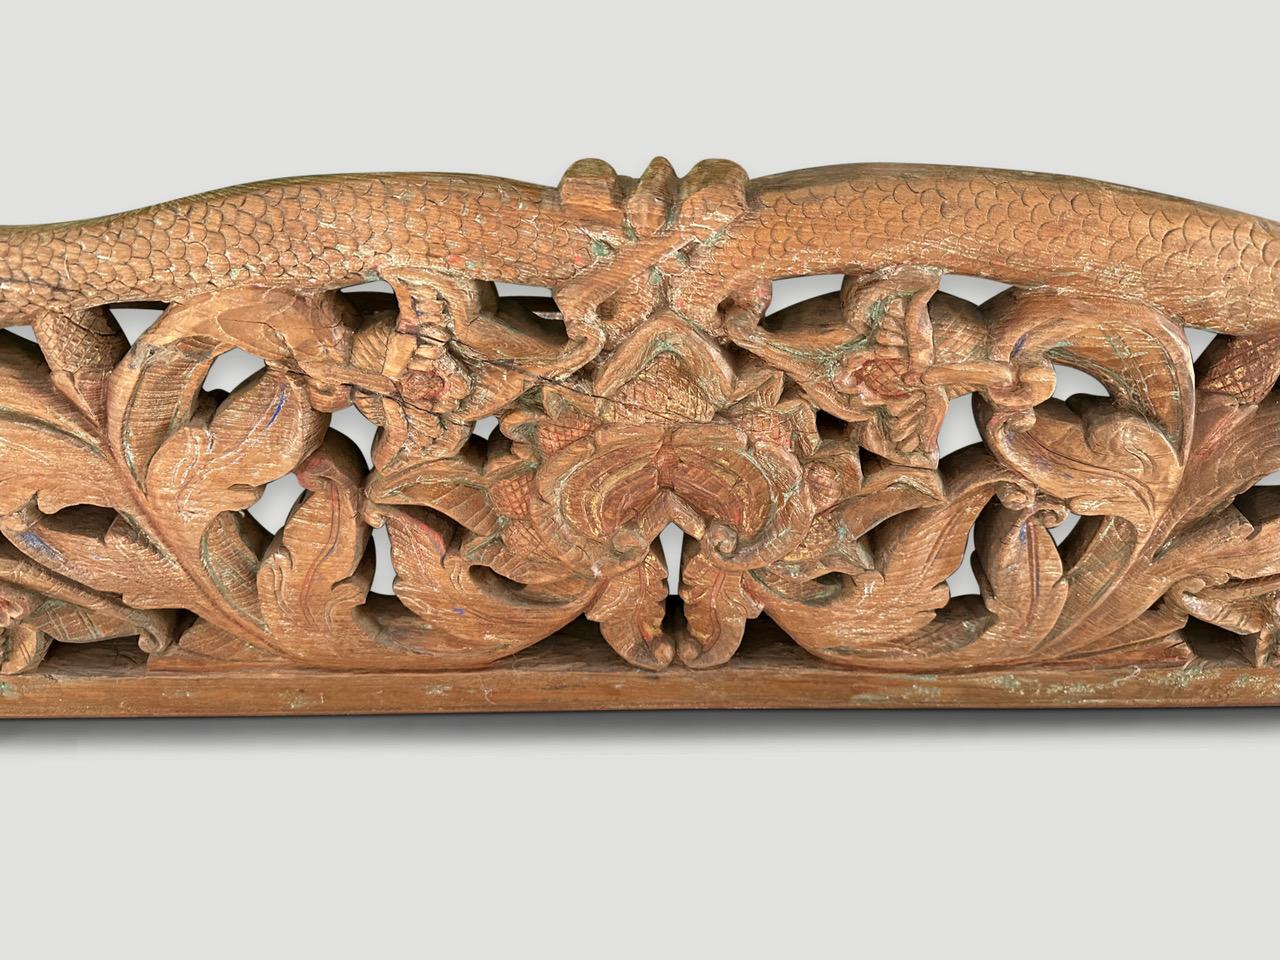 Hand carved wall hanging made from natural teak wood from Sumatra.The dragon symbolizes power, change and spirituality. It also symbolizes good luck, fortune, and prosperity. In some cultures the dragon is a protector and is often associated with